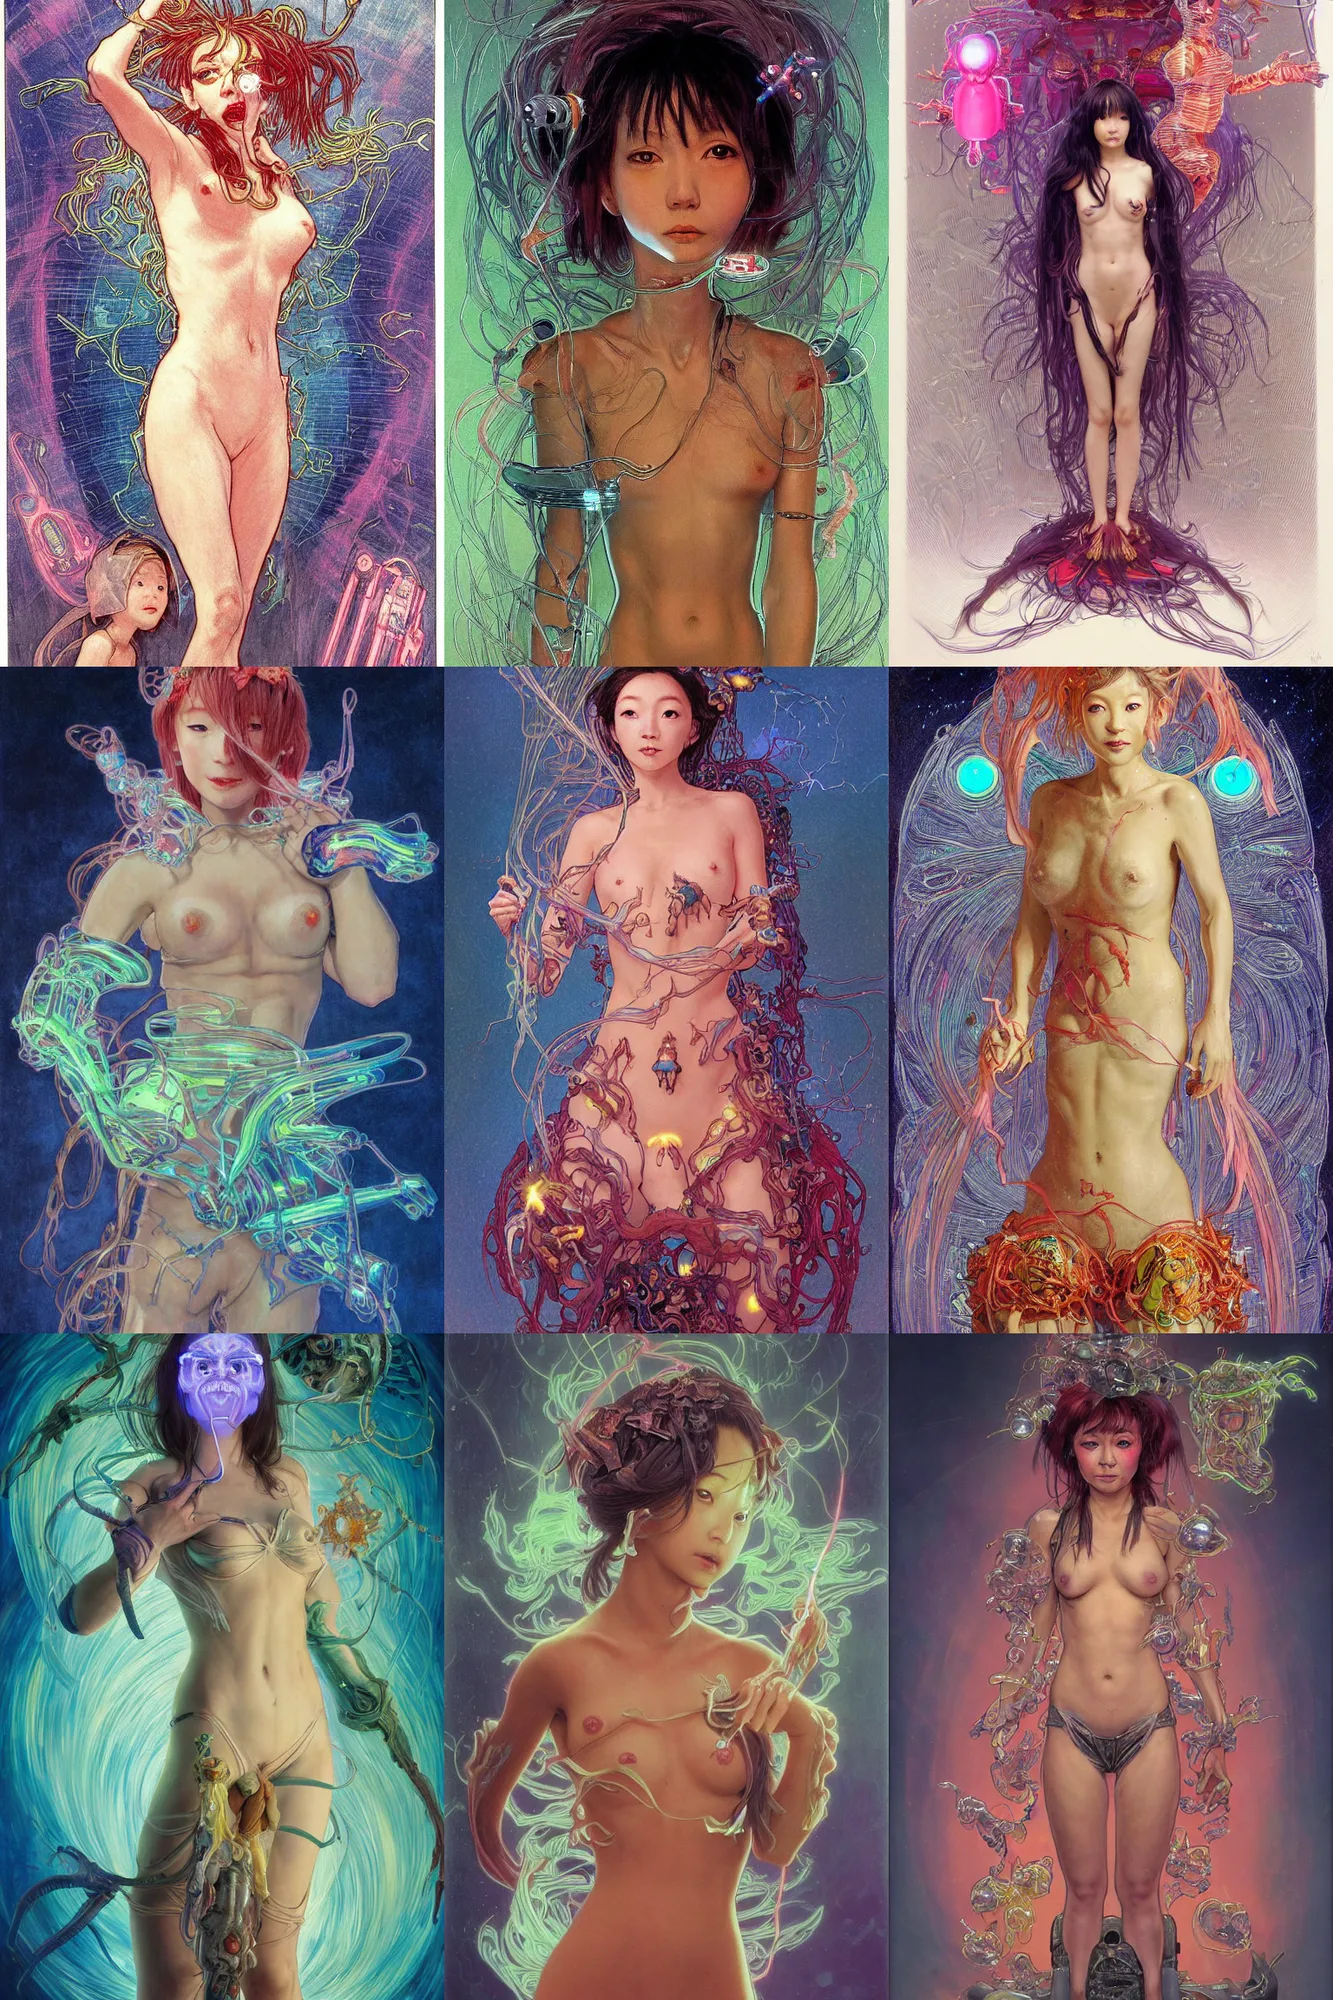 Prompt: awe-inspiring award-winning concept art full body face portrait aspic sculpture of short stature, lithe, petite, innocent, cute, attractive anglerfish cyberpunk Ashley Liao in neon shrouds as the goddess of lasers, sparks, by Julie Bell, Jean Delville, Virgil Finlay, Alphonse Mucha, Ayami Kojima, Amano, Charlie Bowater, Karol Bak, Greg Hildebrandt, Jean Delville, Frank Frazetta, Peter Kemp, and Pierre Puvis de Chavannesa, extremely moody lighting, glowing light and shadow, atmospheric, shadowy, cinematic, 8K,